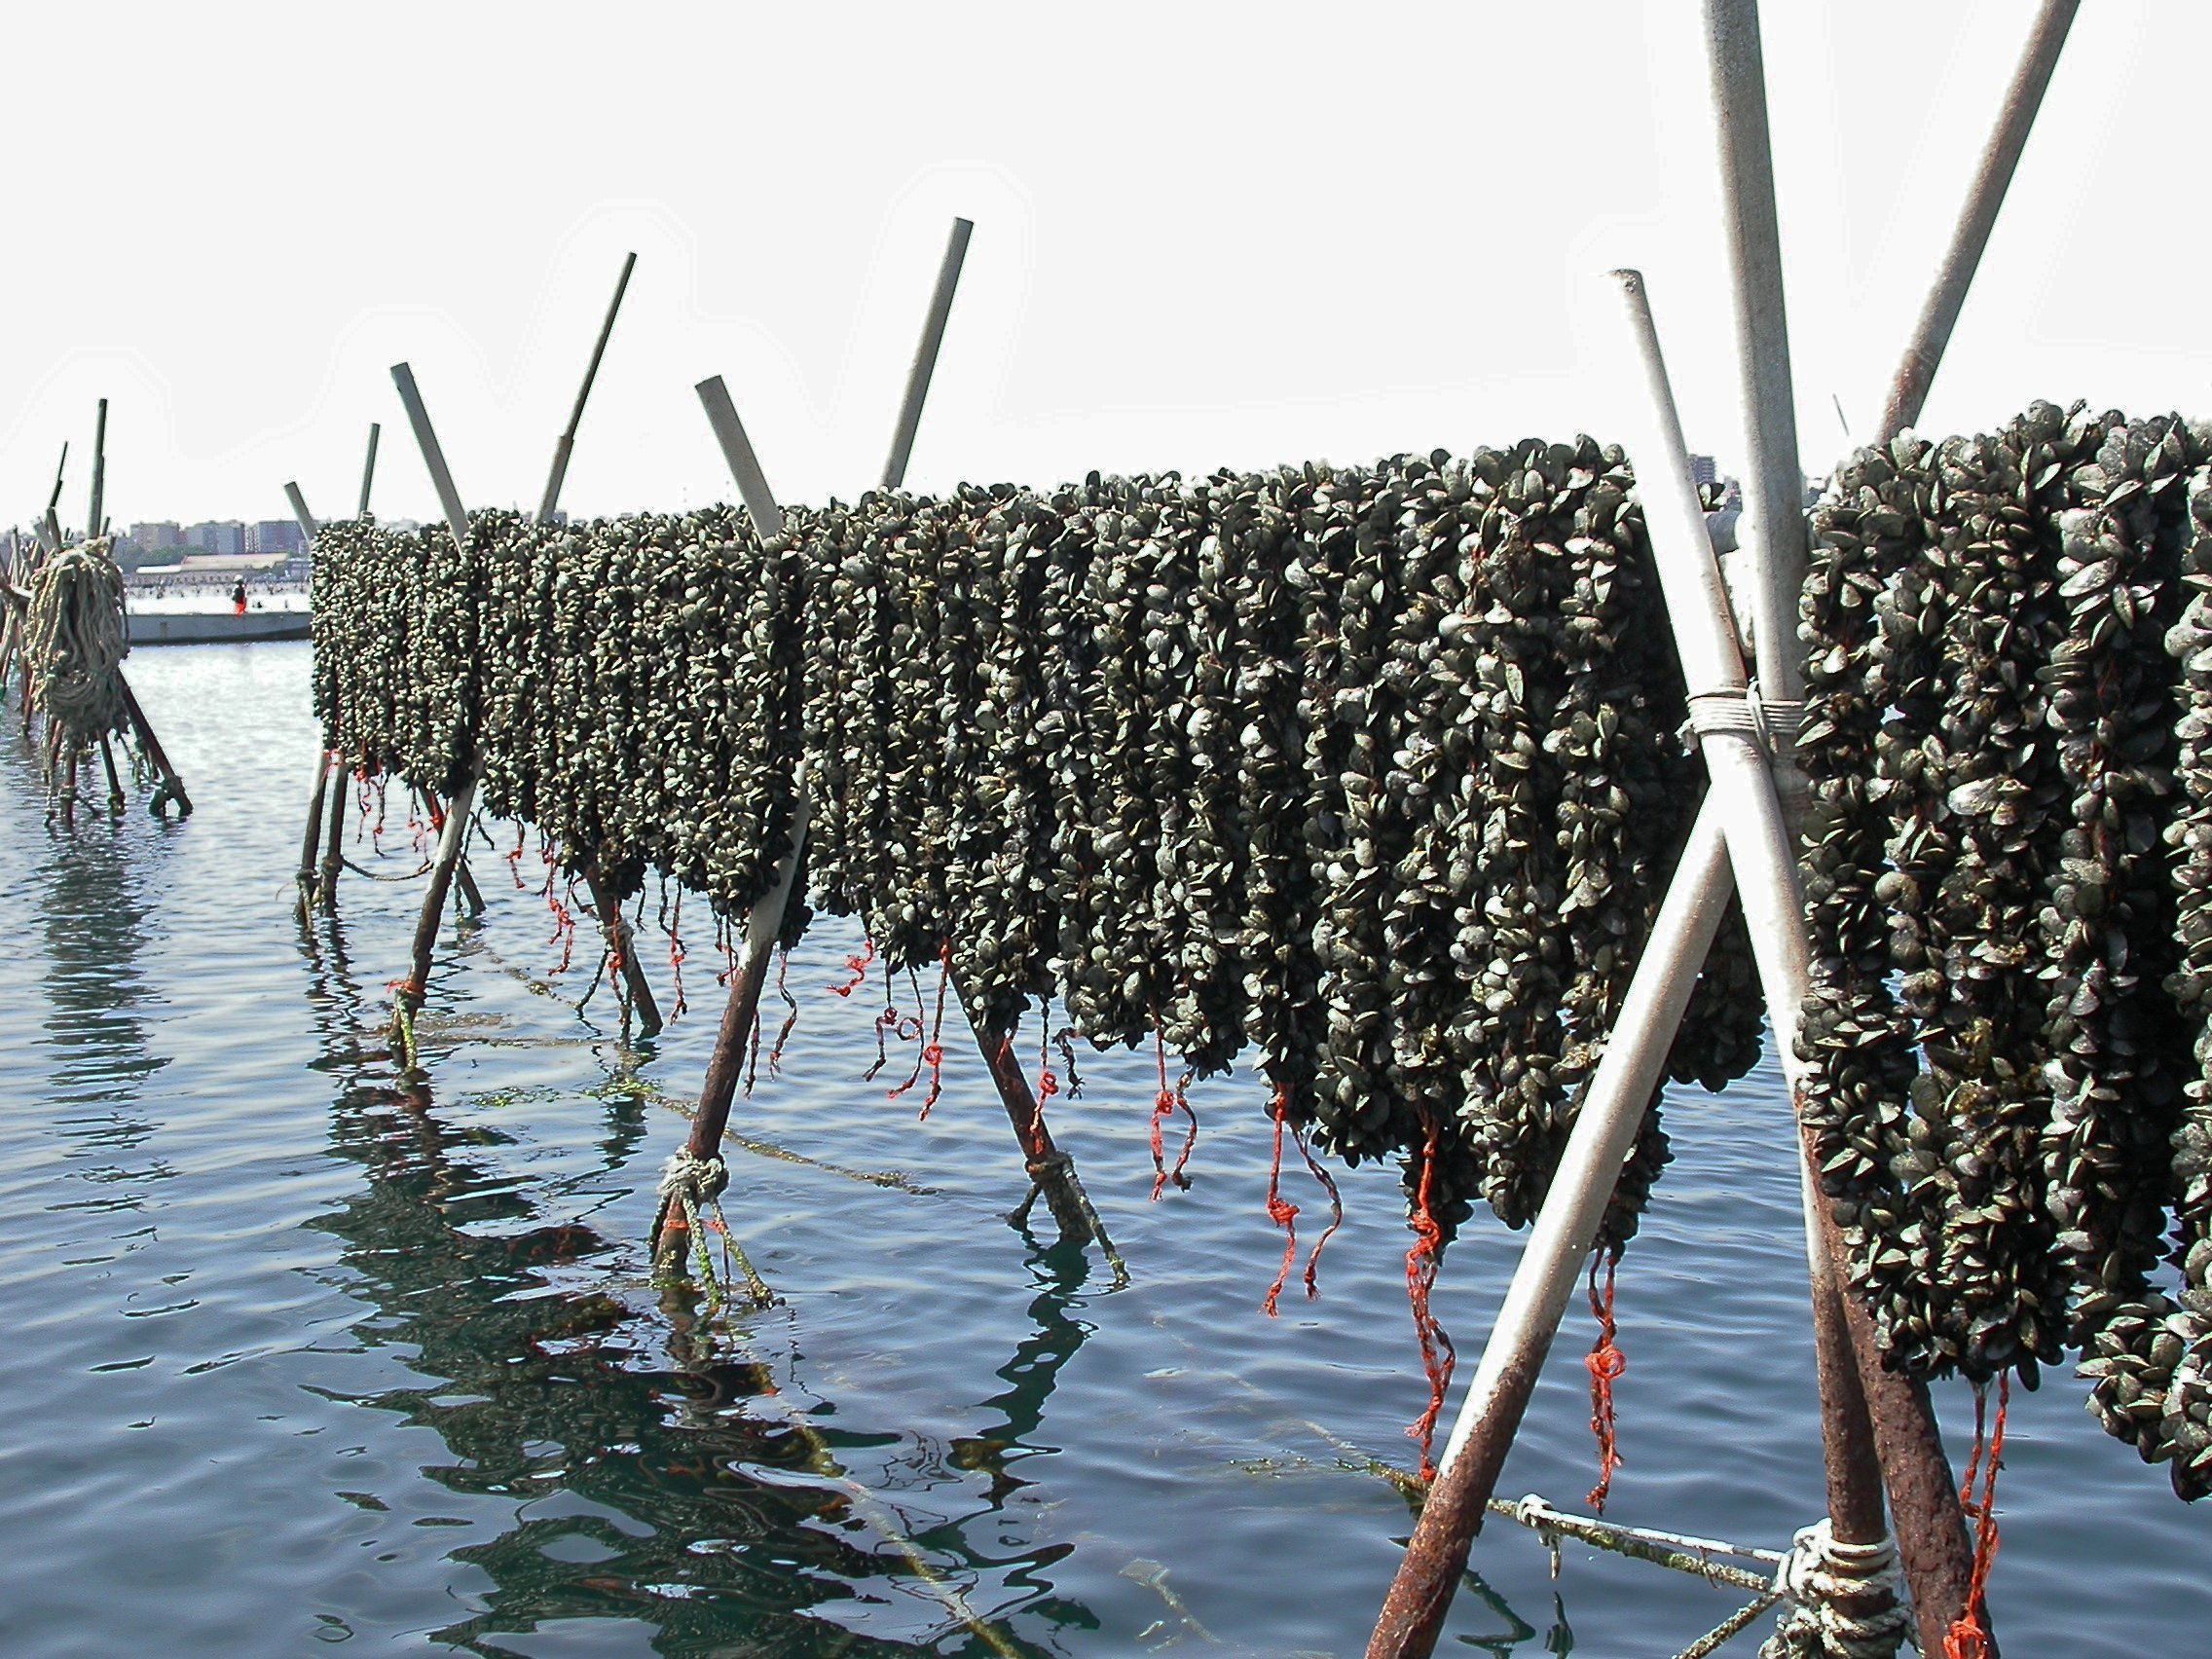 Farmed mussels in the Mar Piccolo of Taranto, hanging on "stenditoi", i.e. metallic poles useful for "sciorinatura", i.e. a short period of emersion to allow the drying of epibionts  